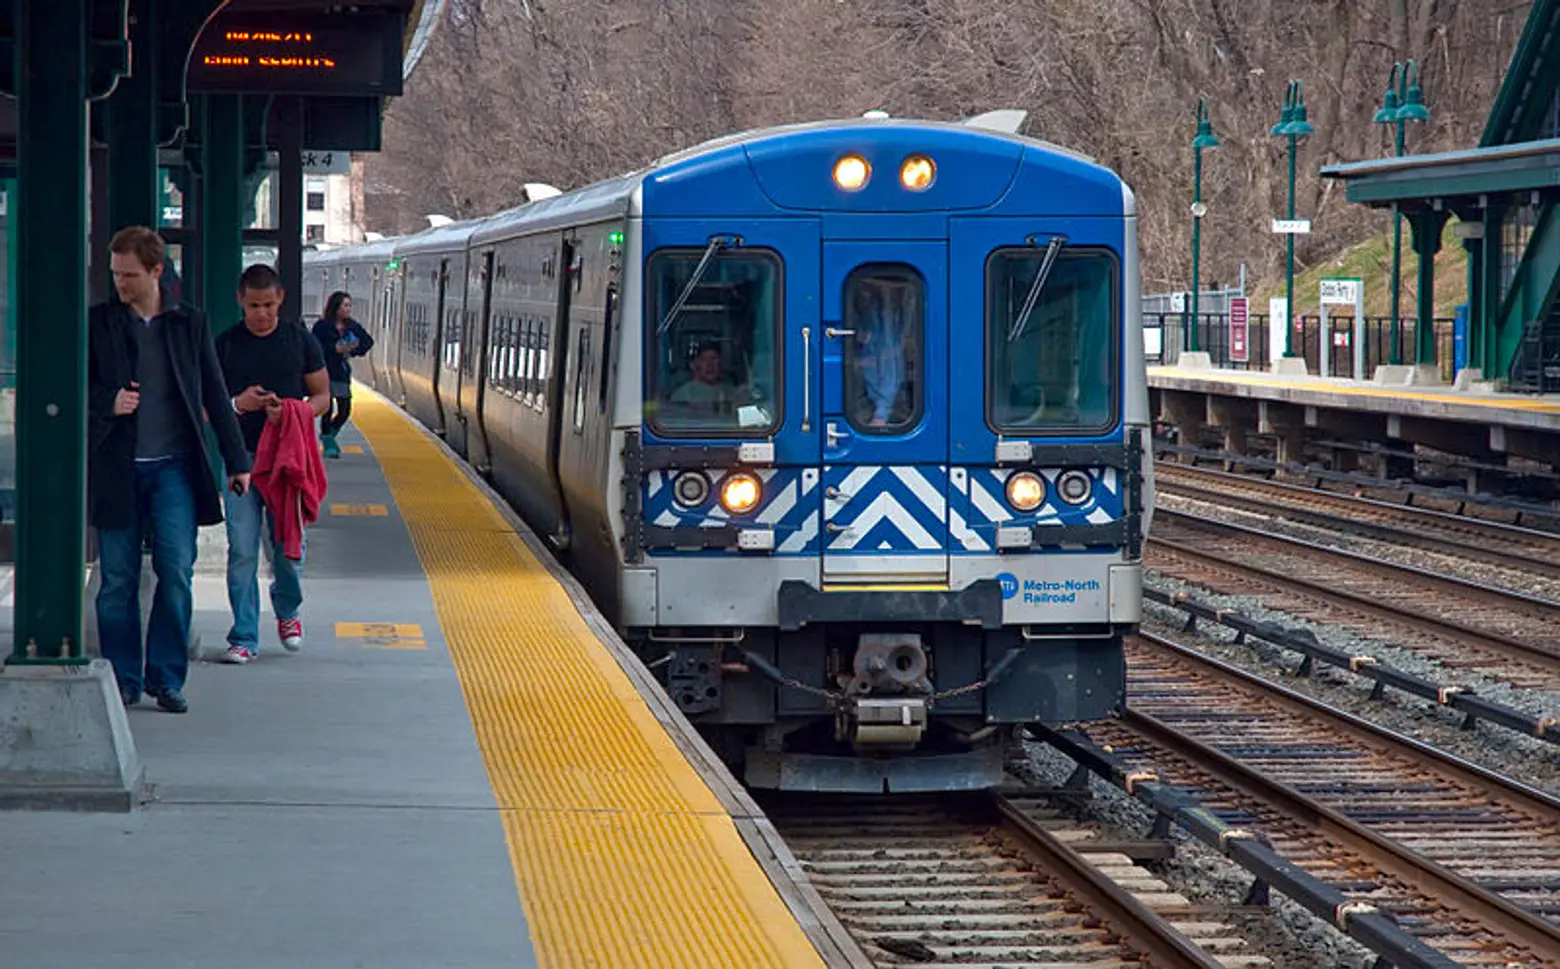 The city is looking to bring Metro-North service to the South Bronx